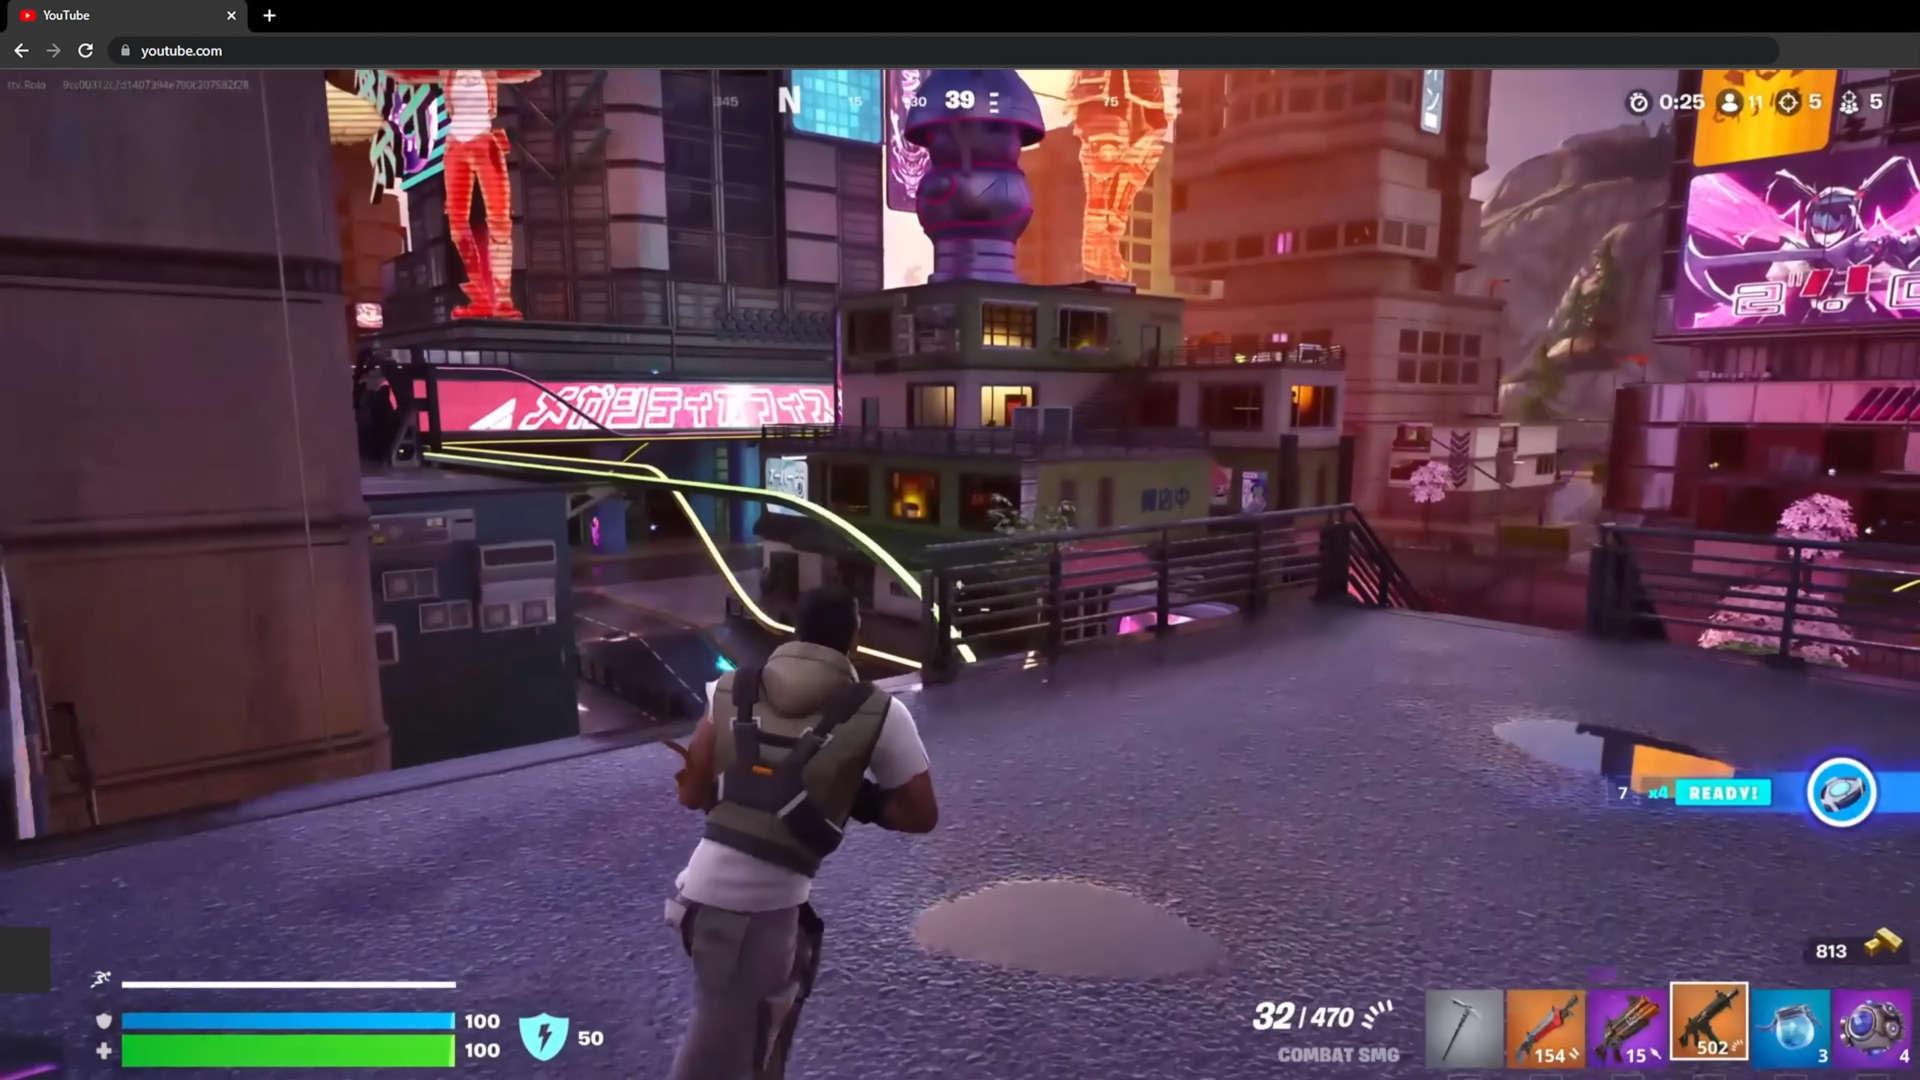 A screenshot taken from a demonstration of Nvidia's RTX Video technology